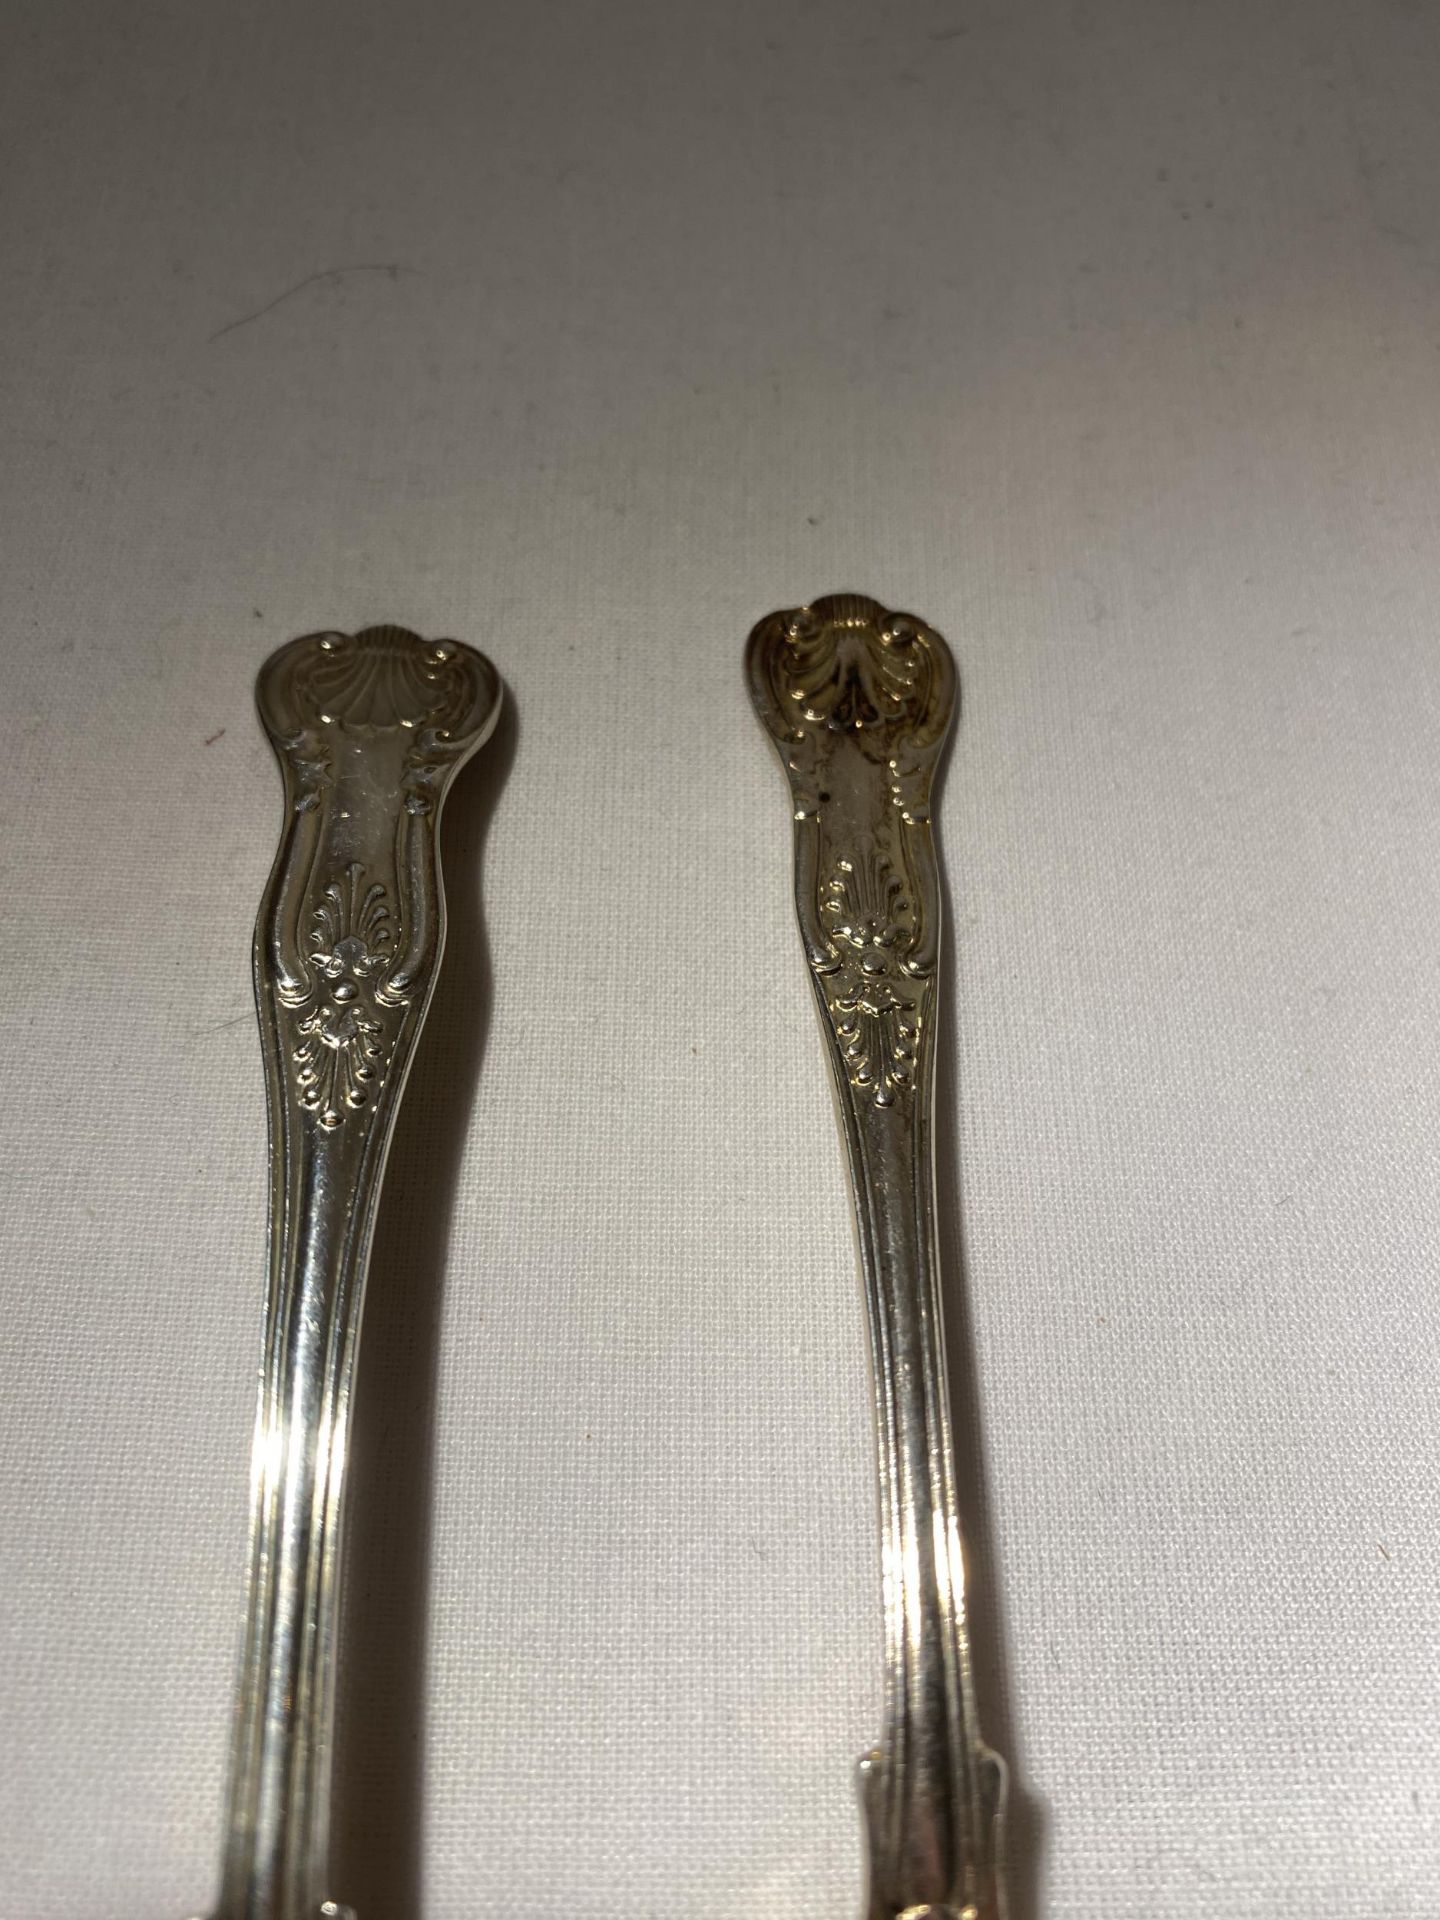 TWO SHEFFIELD HALLMARKED SILVER SPOONS, EARLIEST BEING 1925, MAKER WILLIAM HUTTON & SONS LTD, - Image 7 of 18